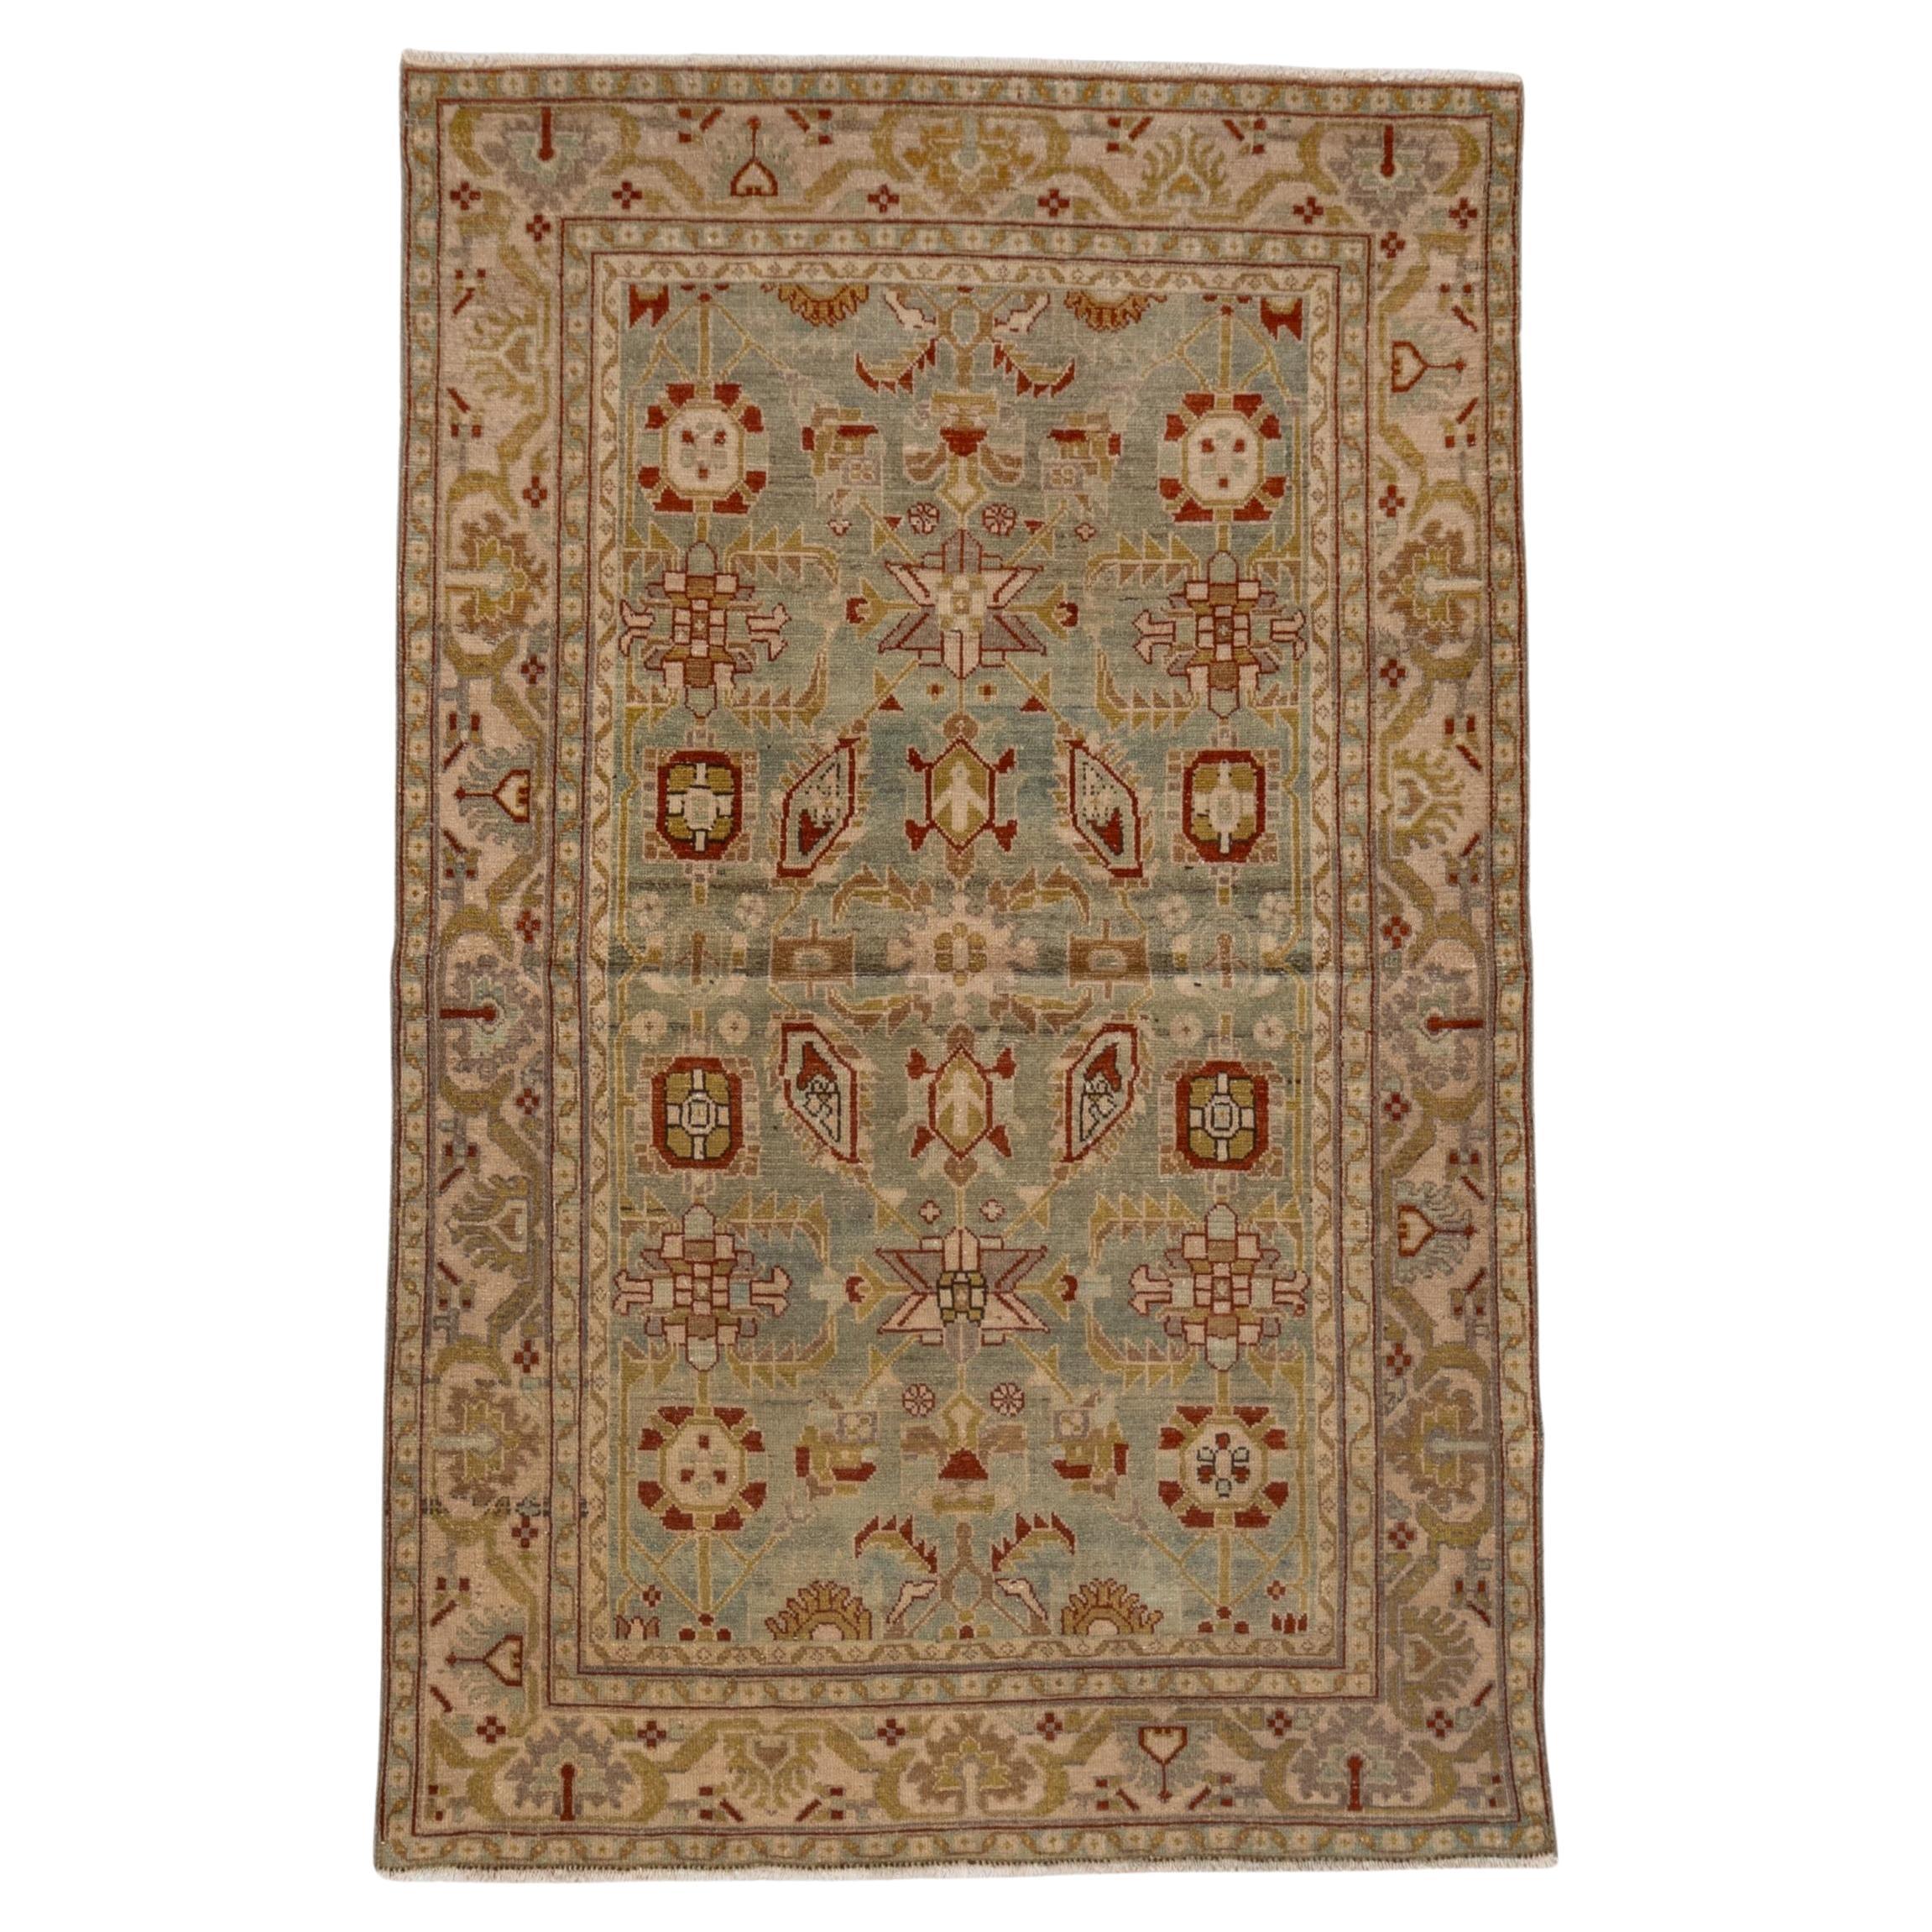 Beautiful Antique Persian Malayer Scatter Rug, Tiffany Blue Field, Rust Accents